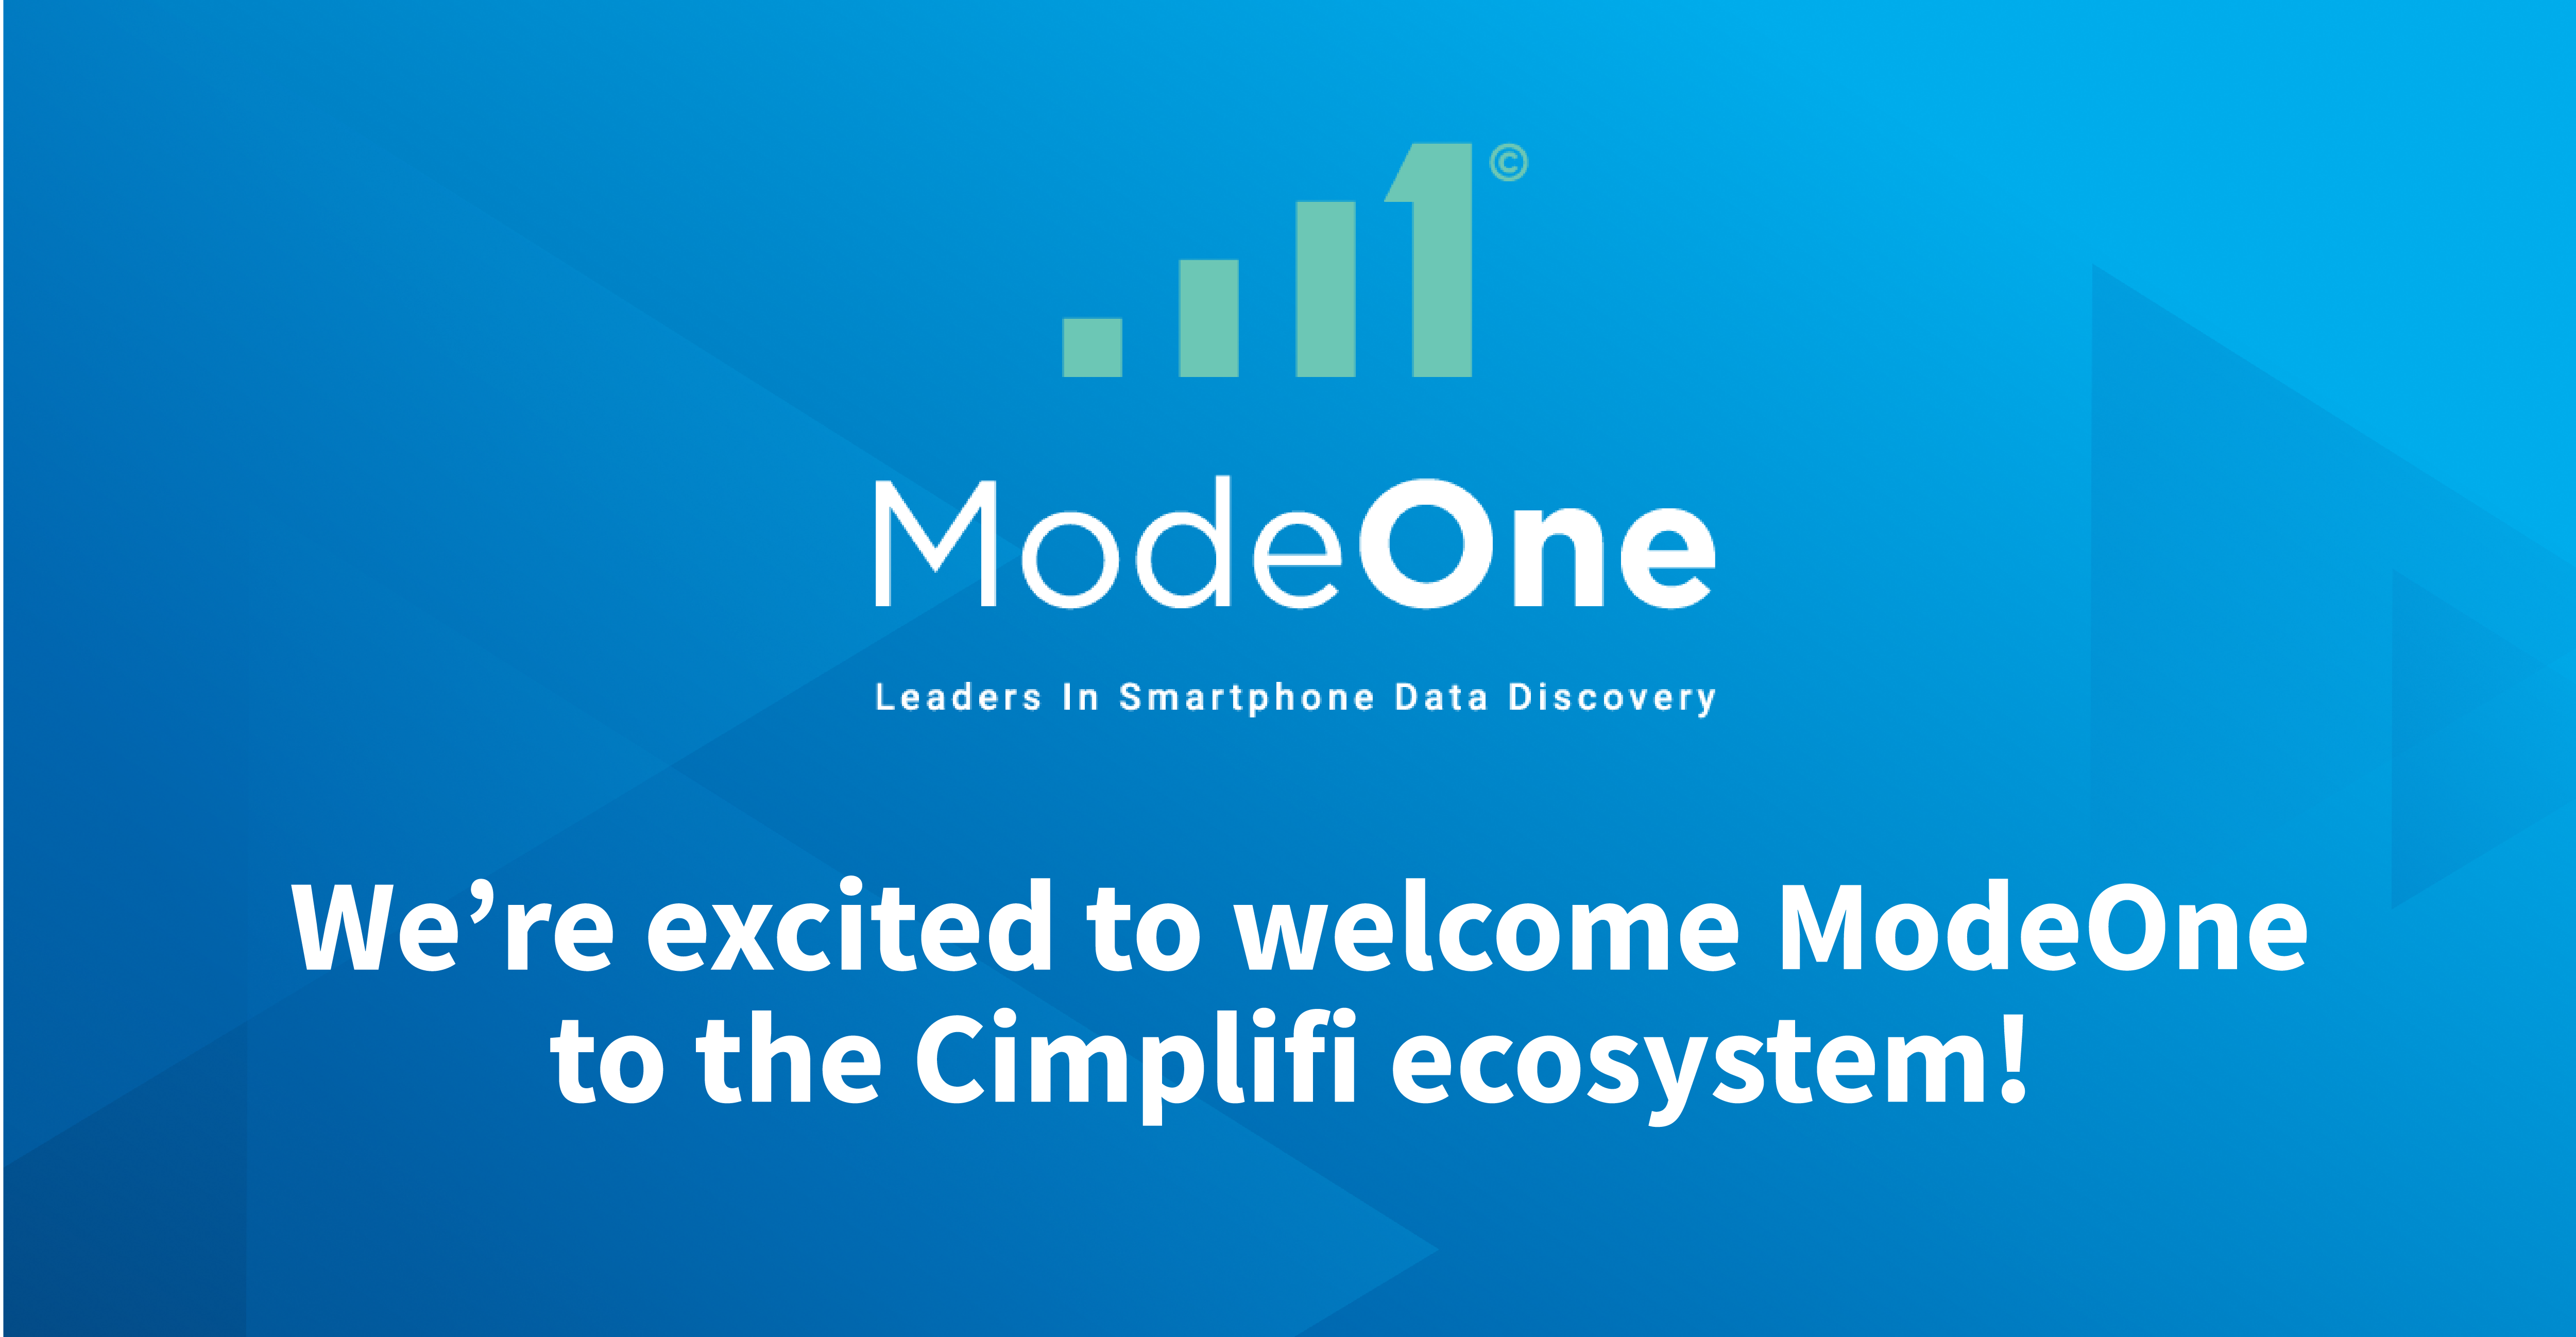 Cimplifi™ Bolsters Ecosystem with ModeOne Partnership